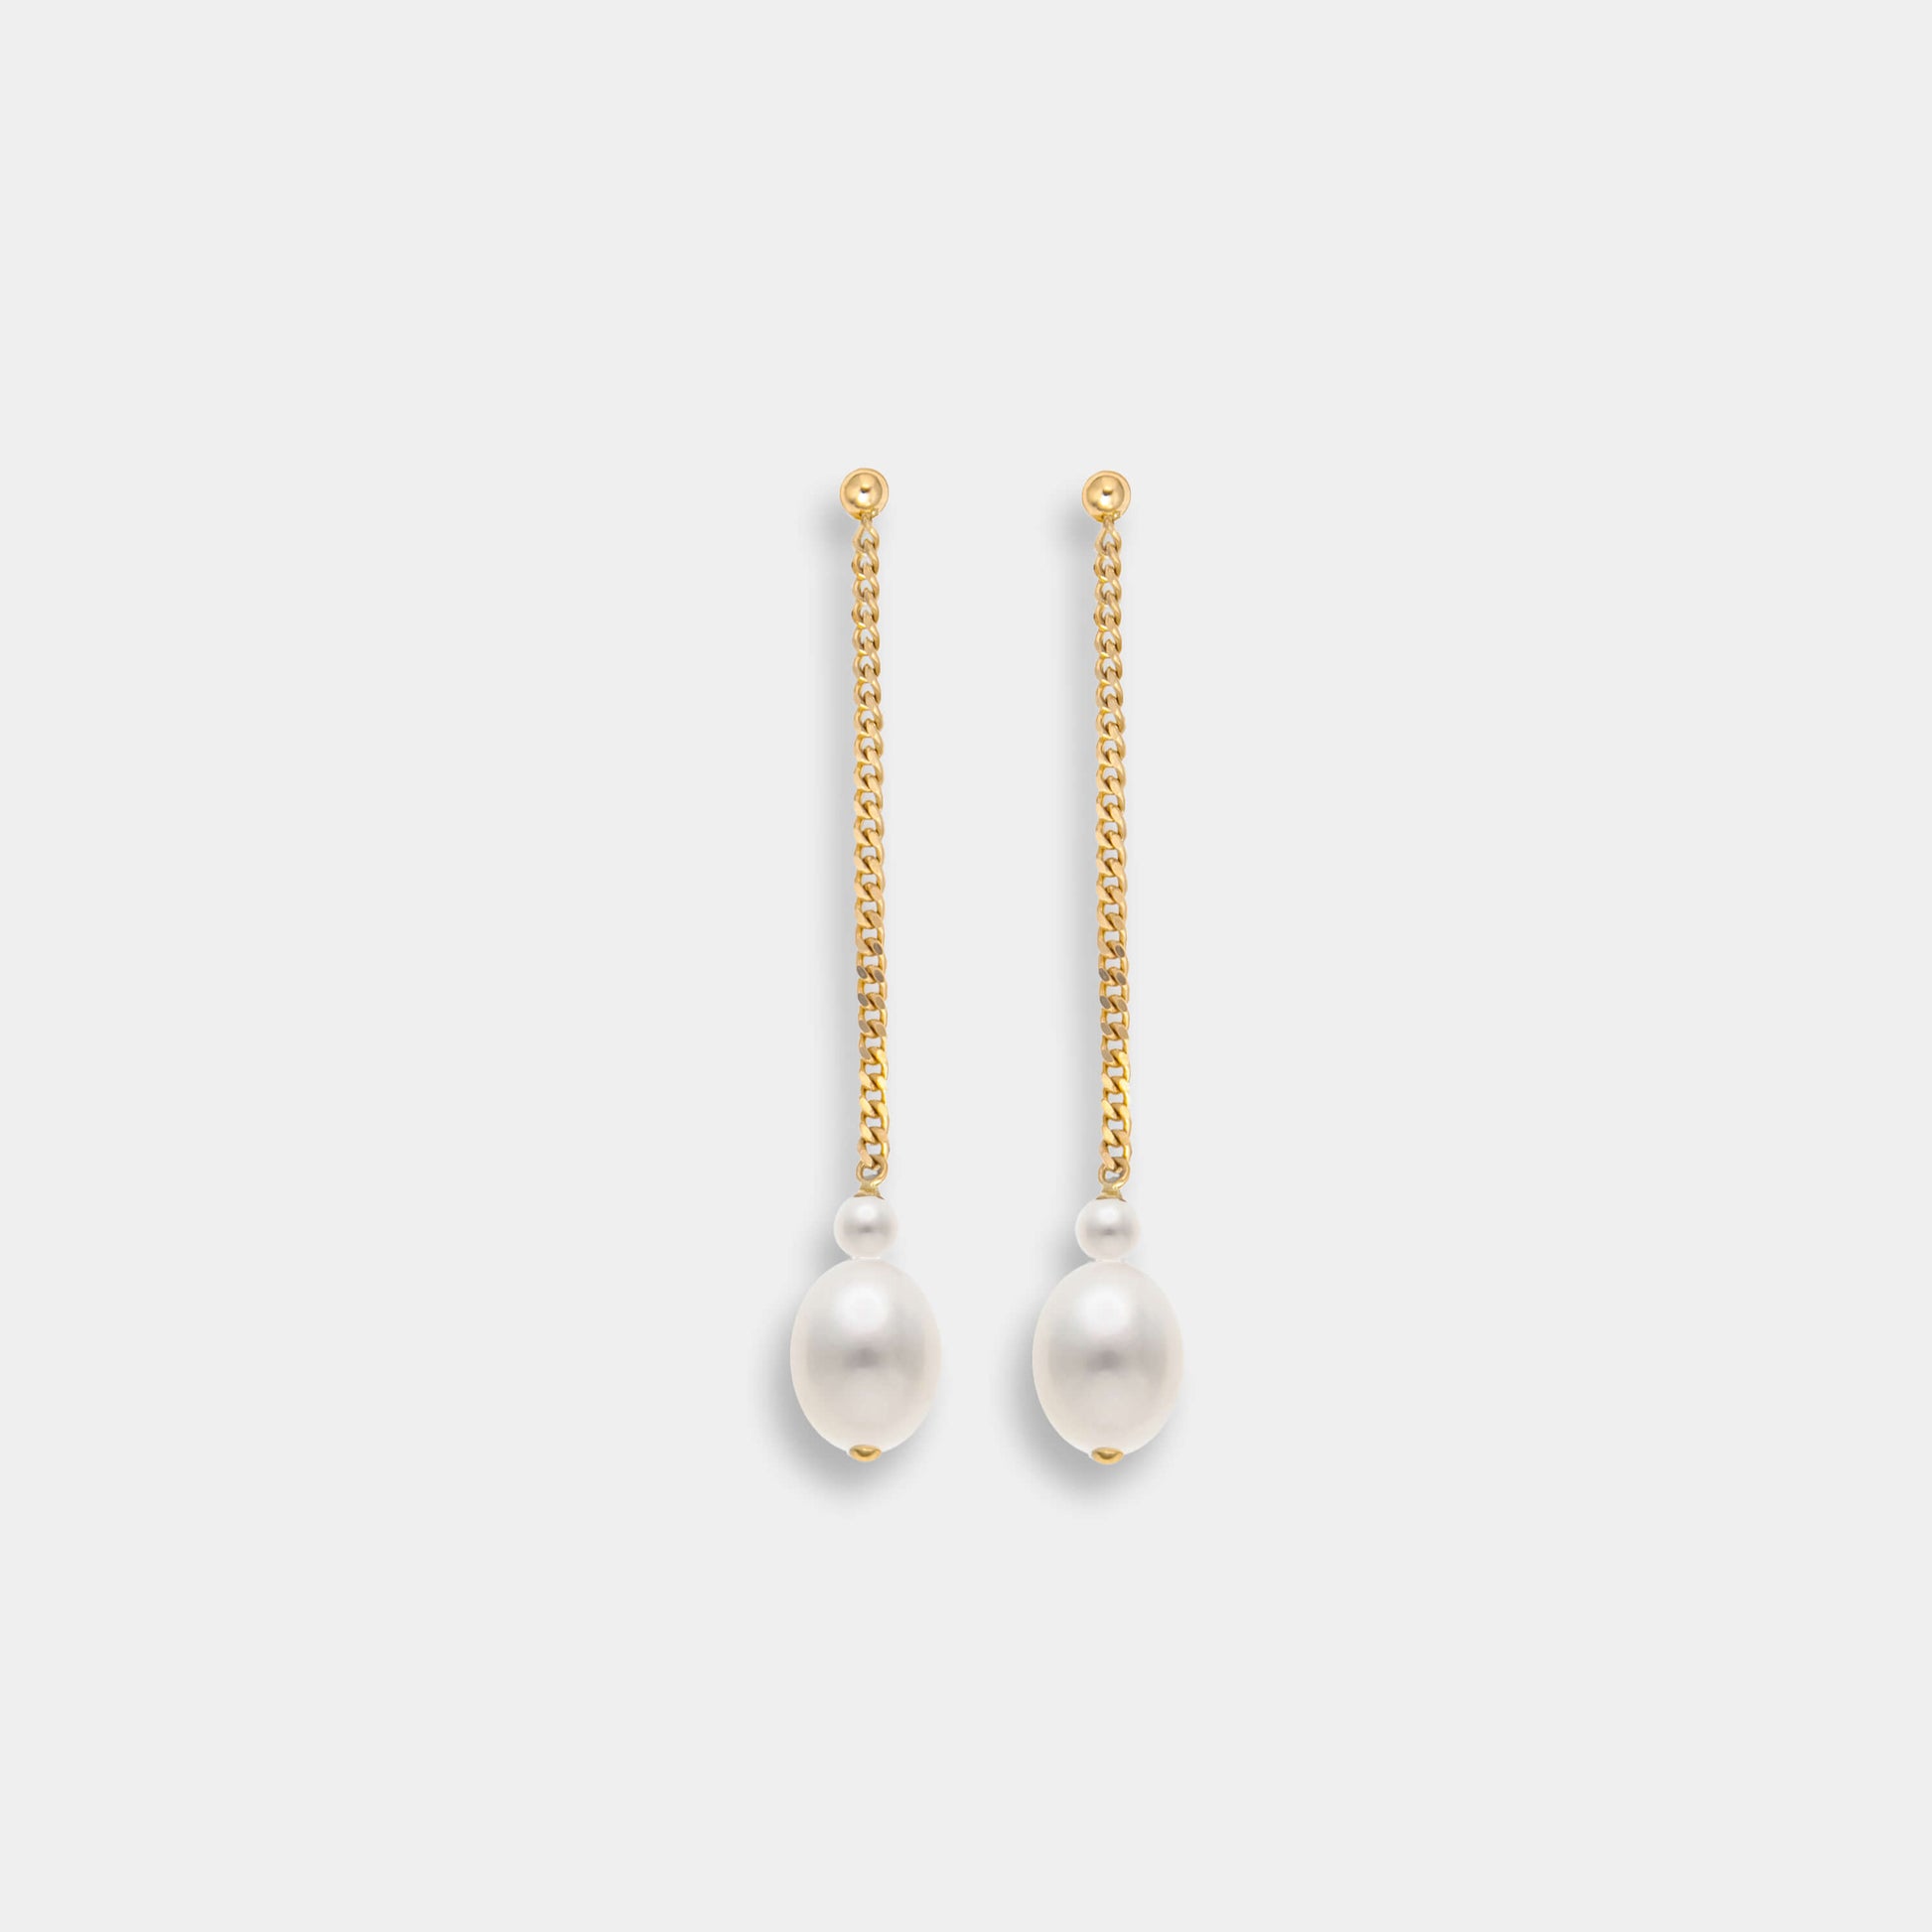 Gold Chain with Oval and Round White Pearl Earring